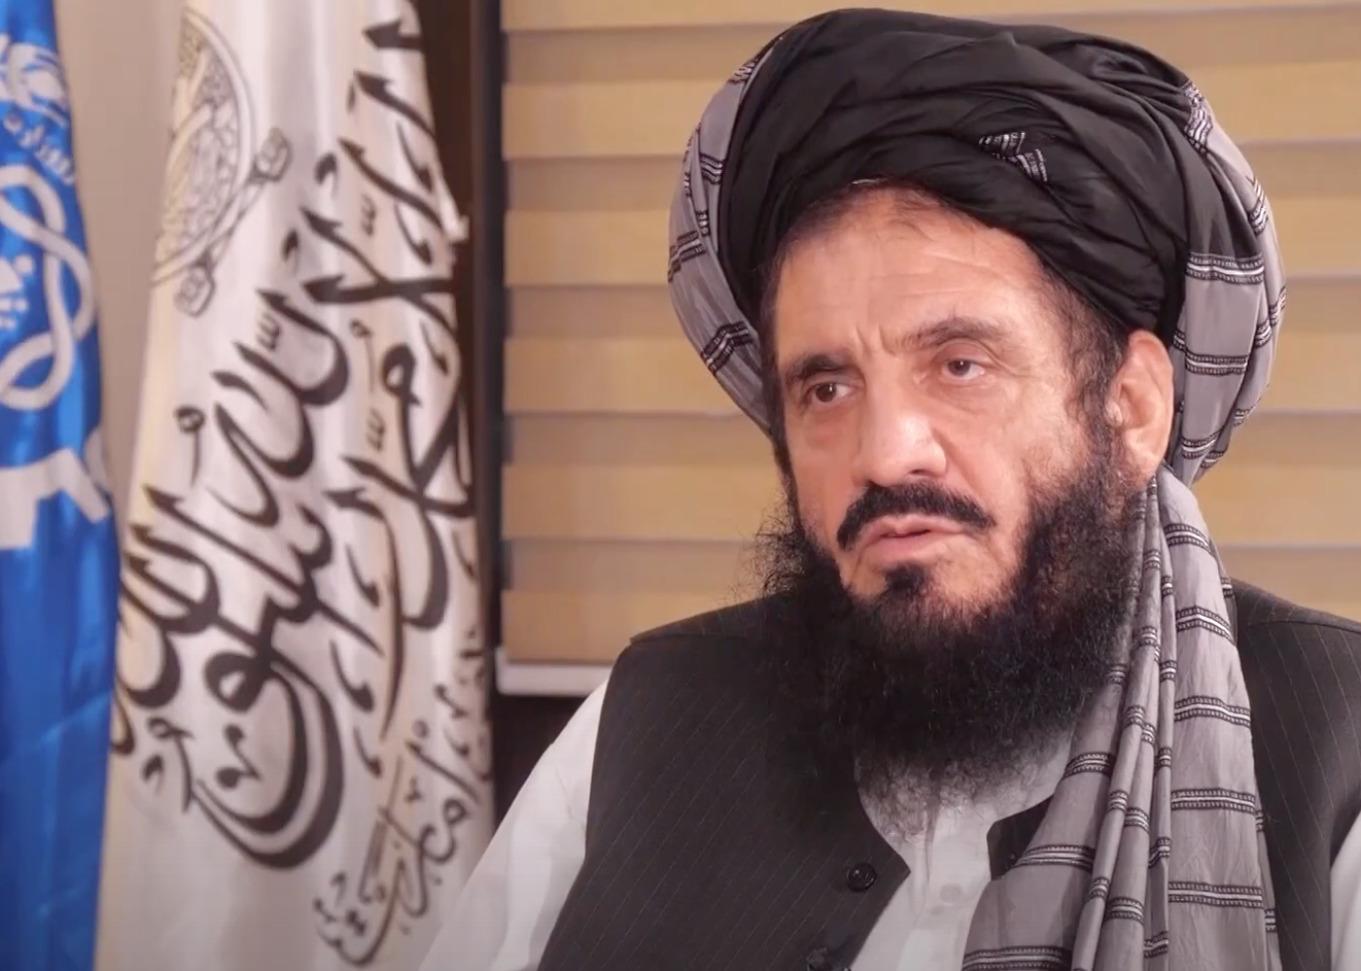 Senior Taliban Official Claims '95%' of Afghans Do Not Want Women to Work